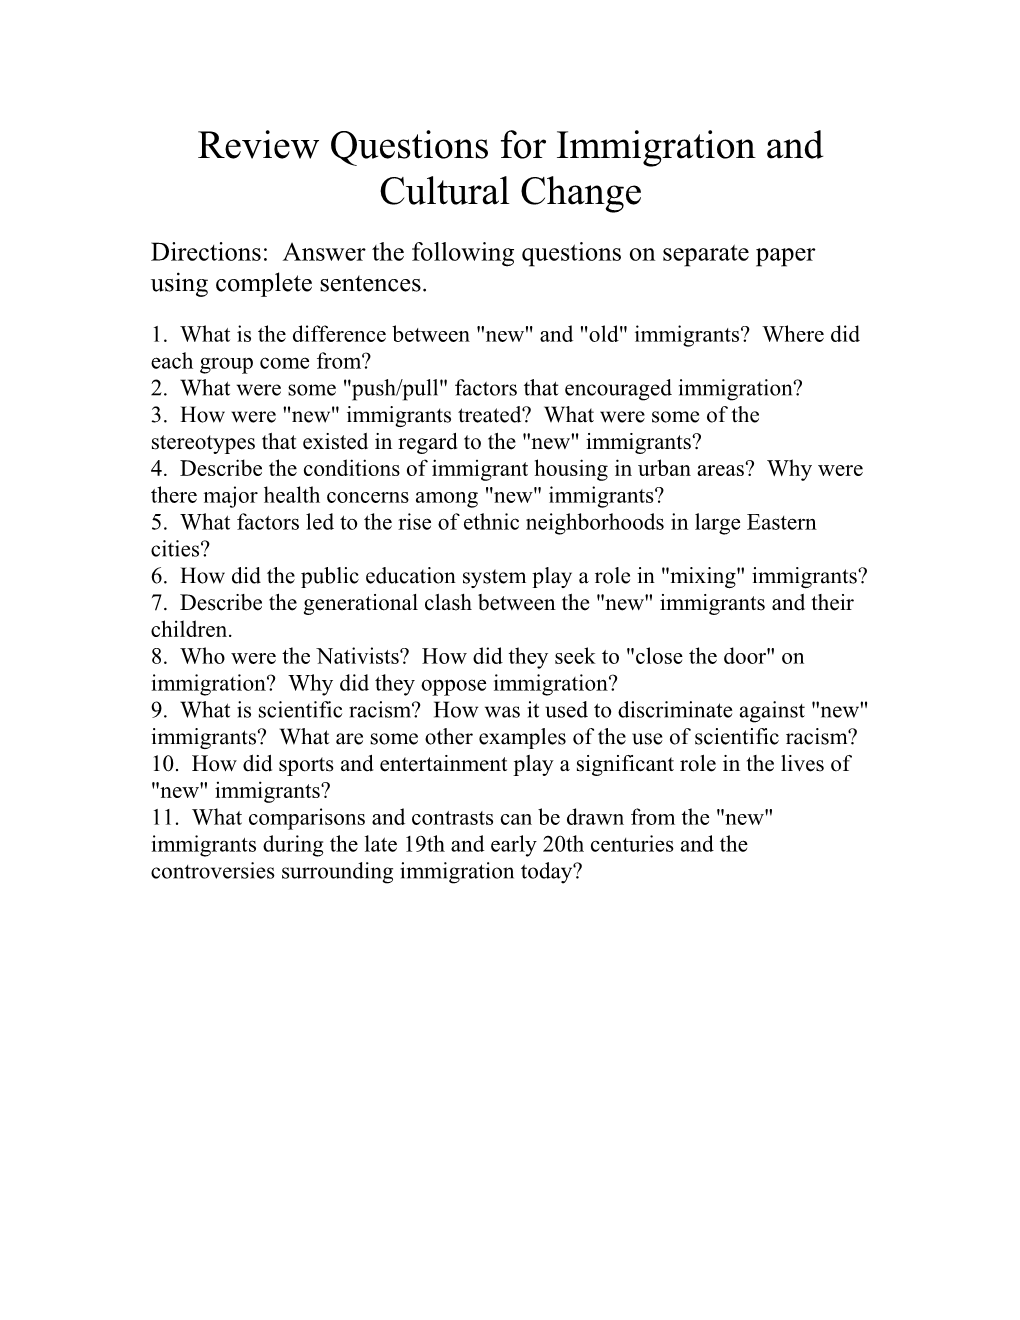 Review Questions for Immigration and Cultural Change